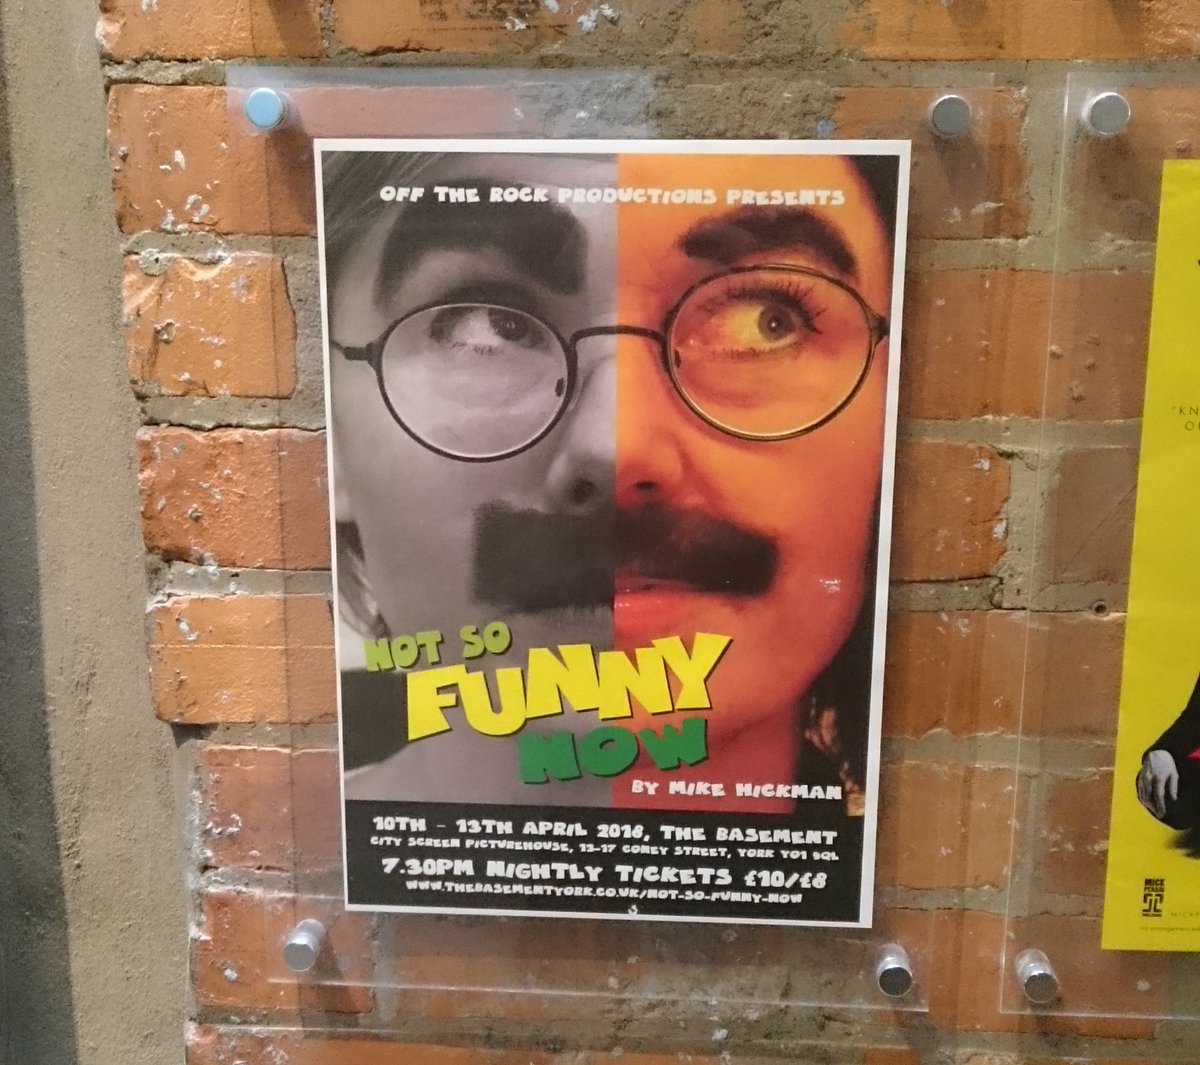 The 'Not So Funny Now' poster is looking good at the @TheBasementYork!

We open a fortnight today!

Have you got your ticket yet?...

thebasementyork.co.uk/not-so-funny-n… …

#Theatre #NewWriting #York #HollywoodScandal #MarxBrothers #Groucho #OutrageousUseOfGreasepaint